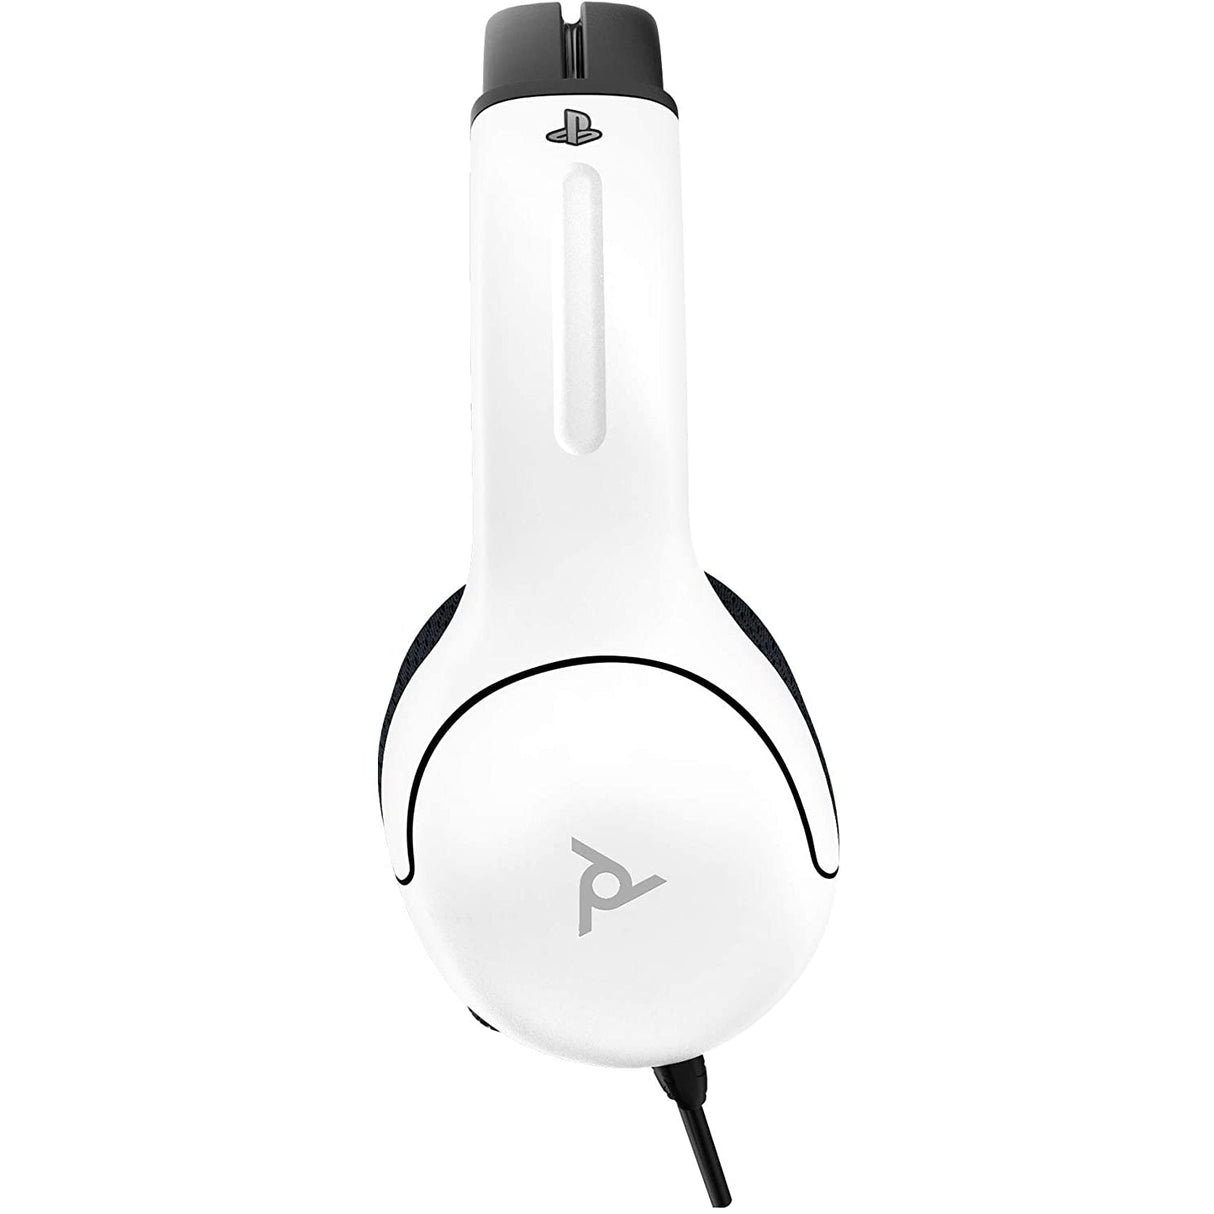 PDP LVL40 Wired Stereo Gaming Headset for PlayStation - White/Black - Refurbished Good